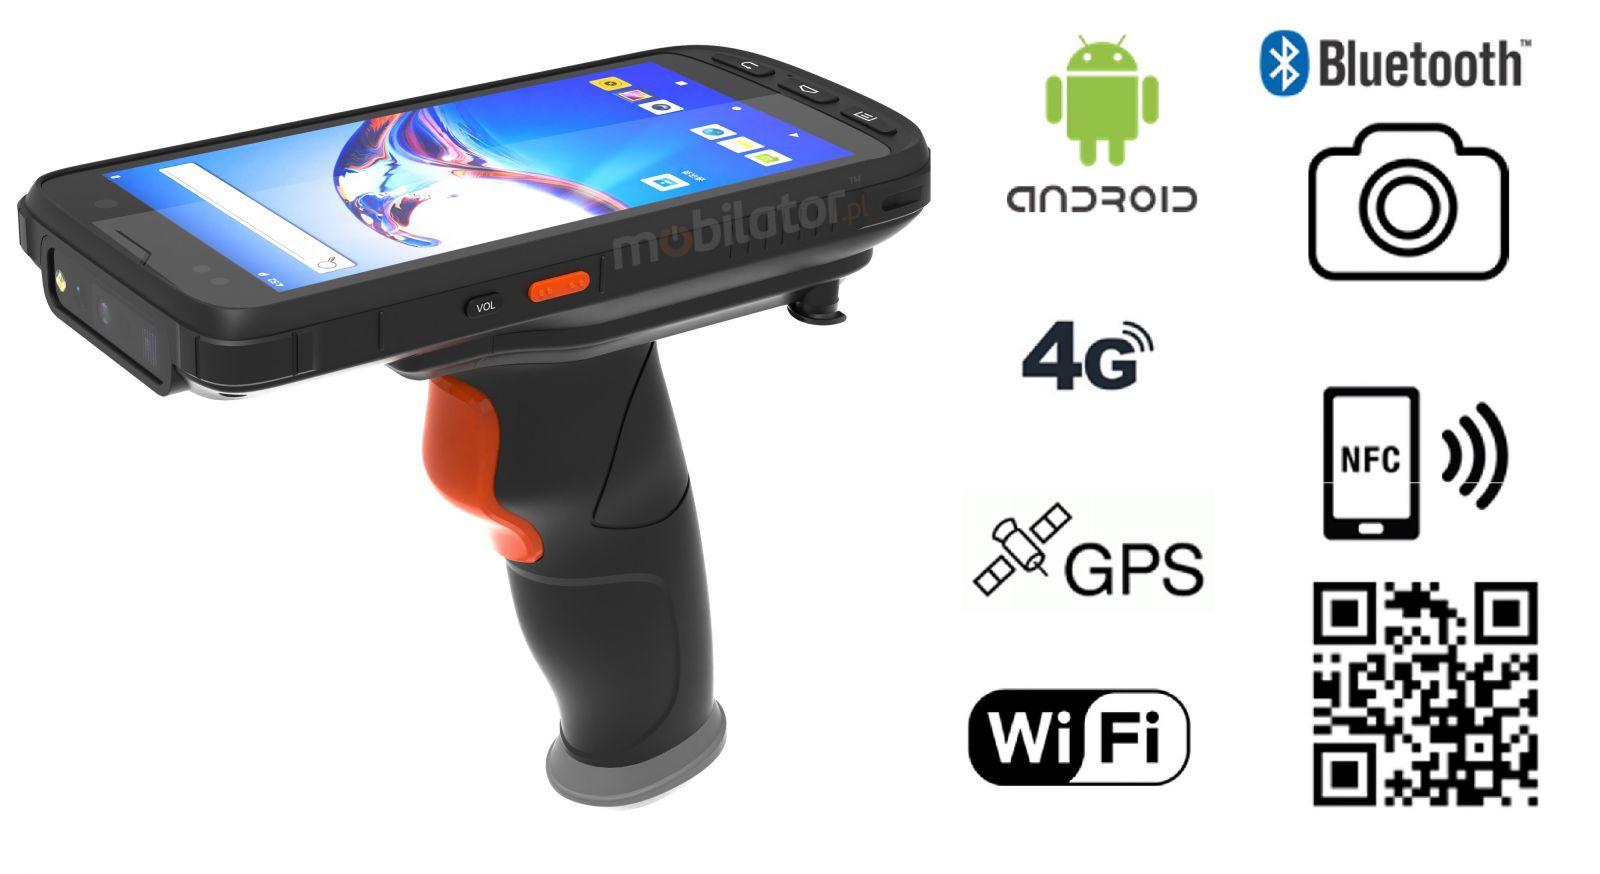 MobiPad XX-B6 v.4 - Data collector with 2D scanner (Zebra SE4710), pistol grip, NFC and resistant housing with IP65 standard 